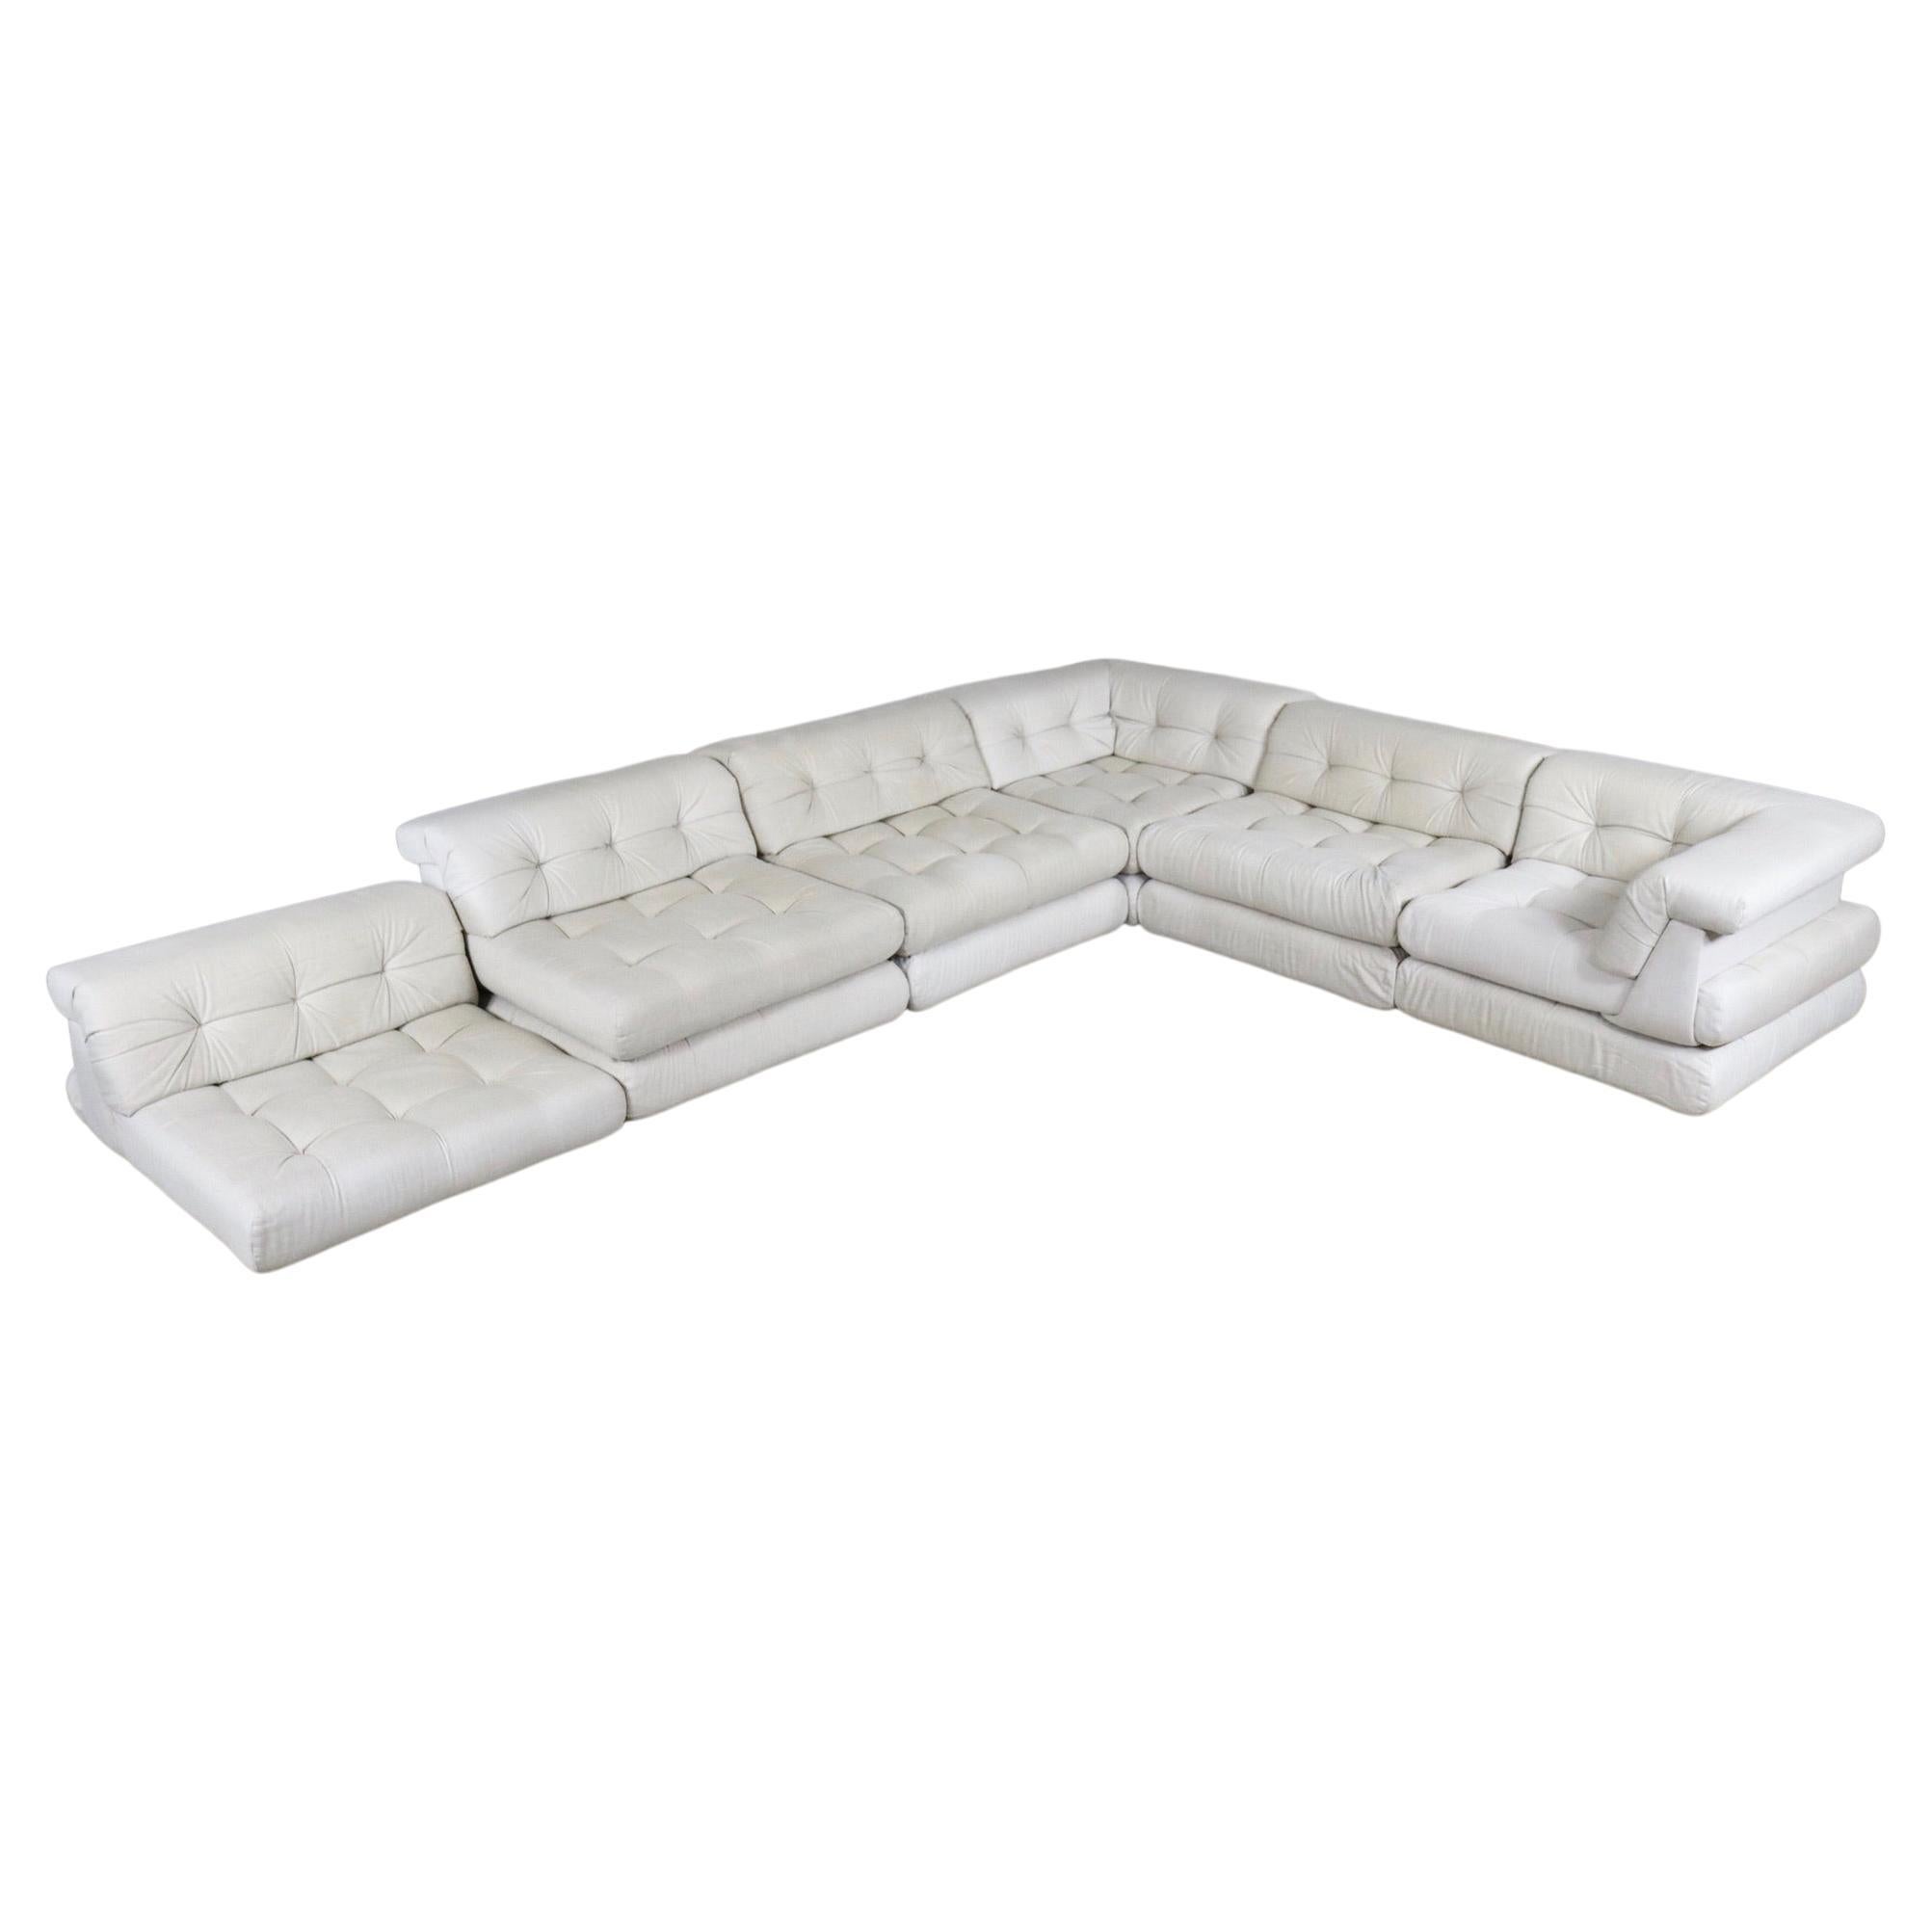 First Edition Mah Jong Sofa in White Linen by Roche Bobois, 1970s